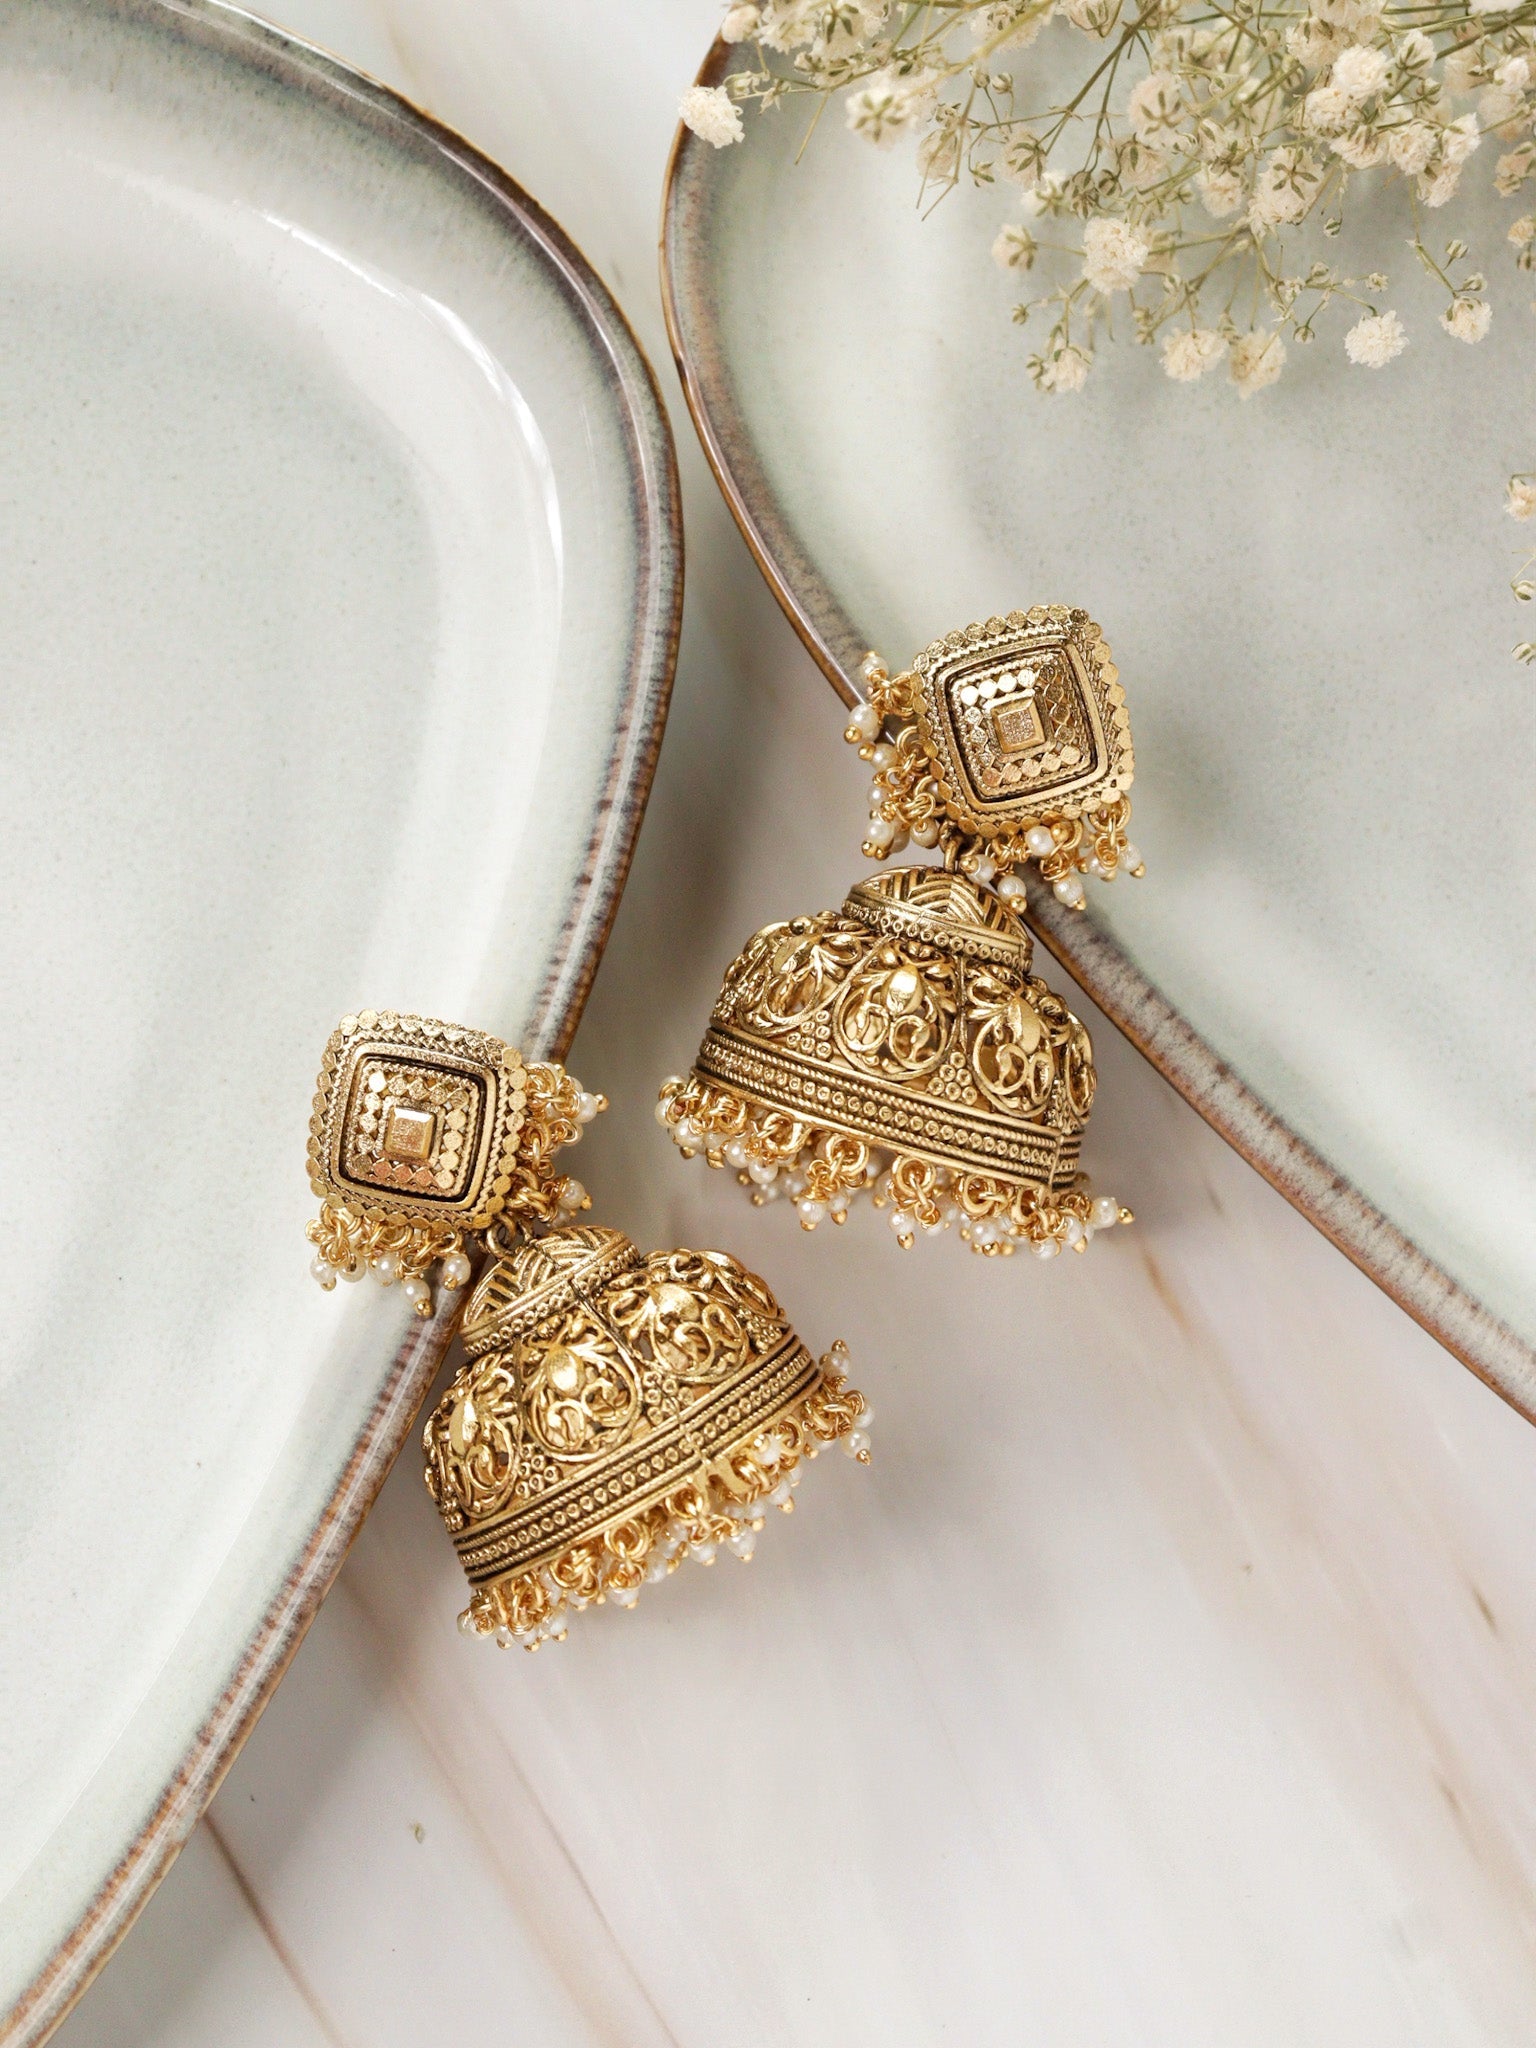  22K Gold Plated Intricate Handcrafted Jhumkas